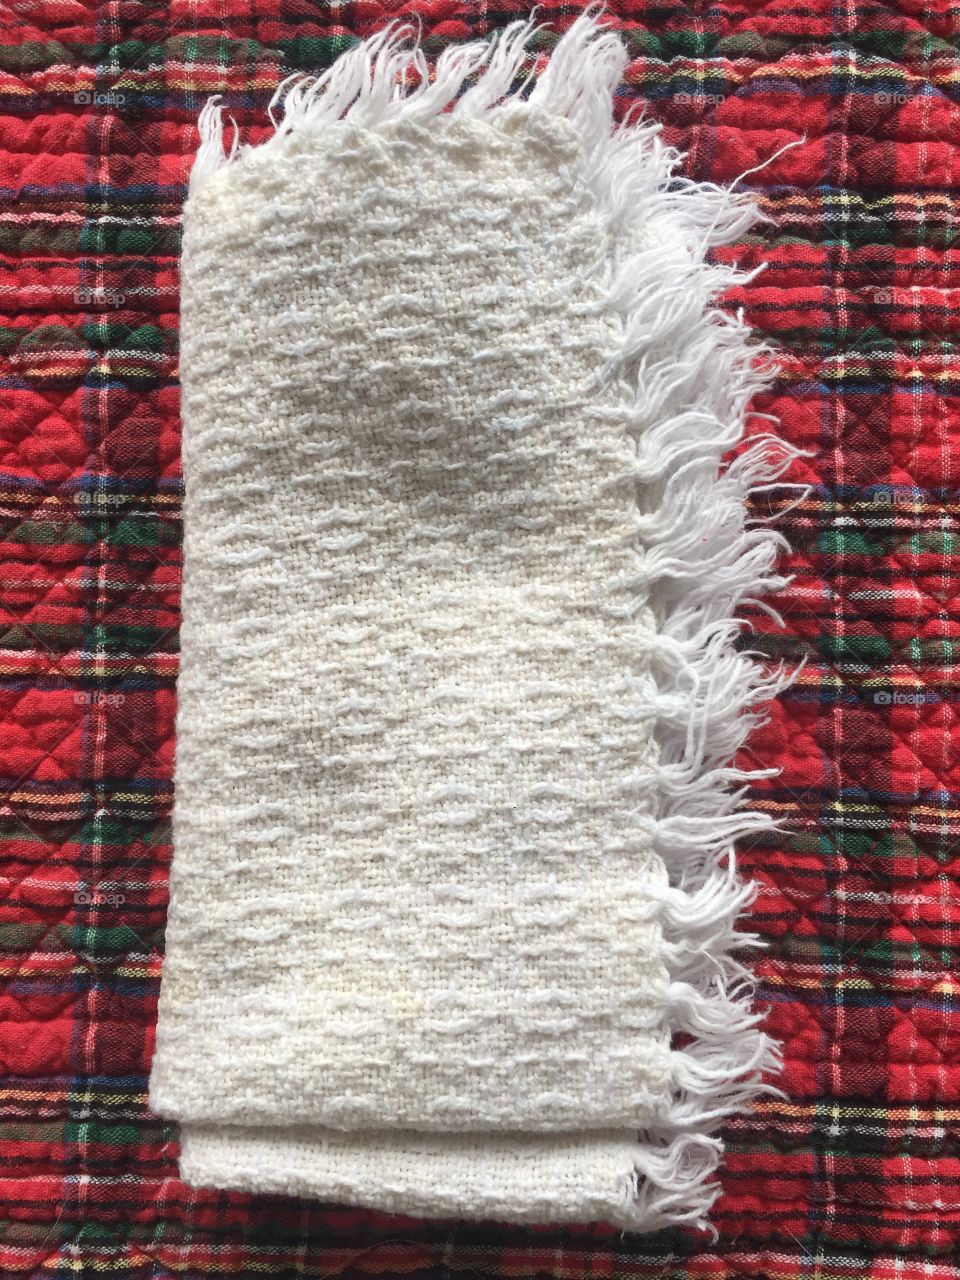 A white, fringed napkin sits on a red tartan placemat.  Both have a nice and highly visible fabric texture.